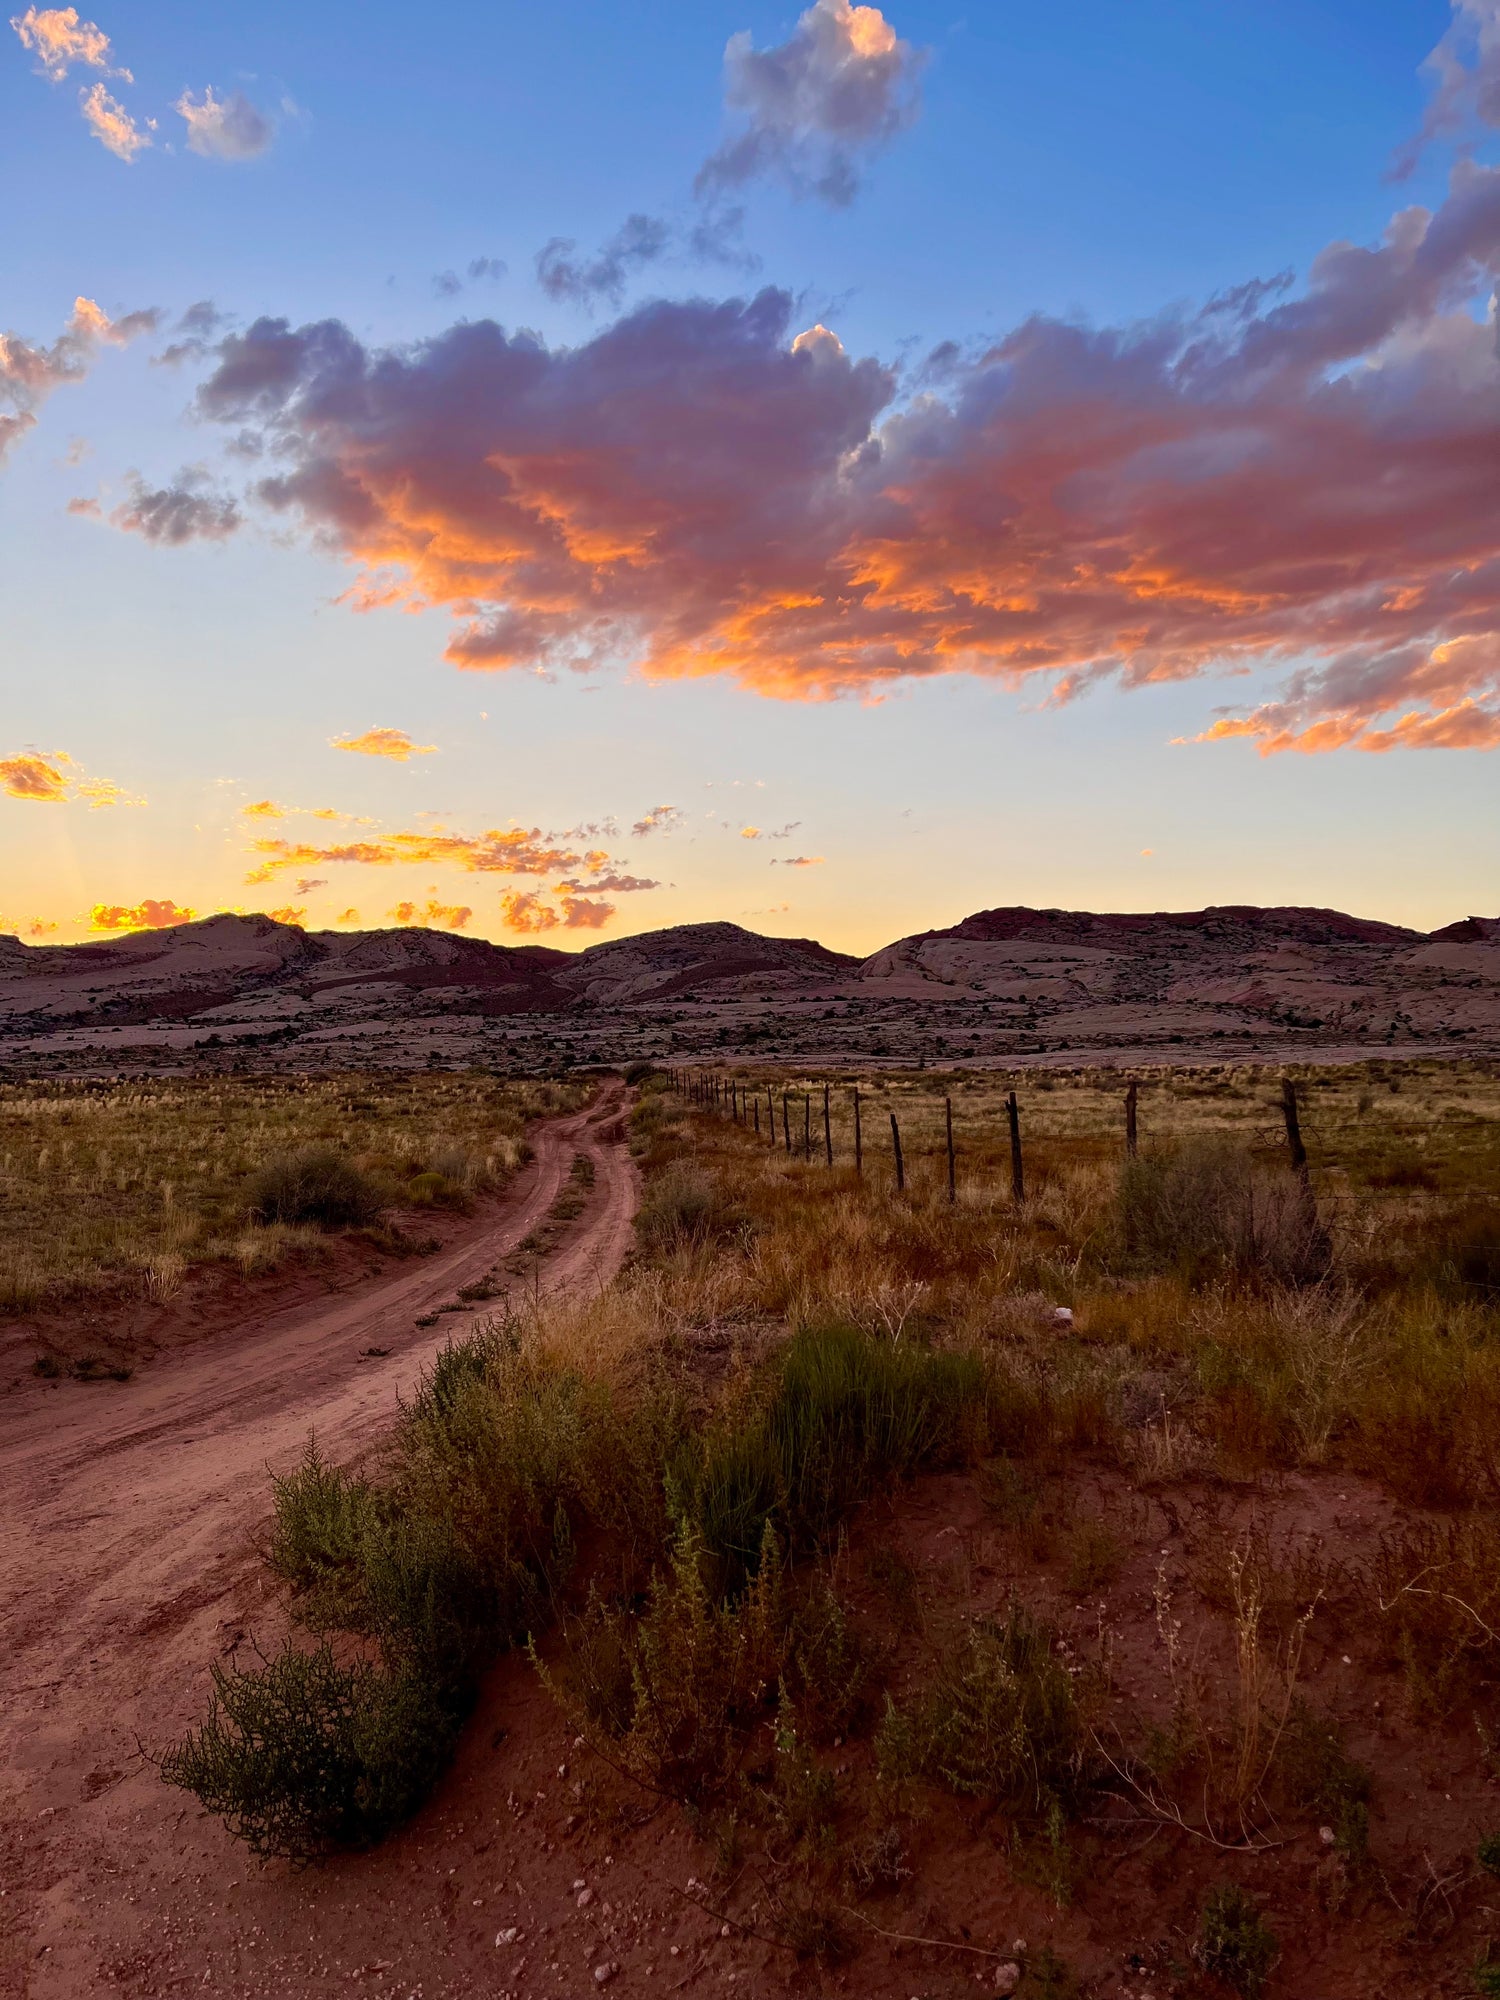 A photo taken just after sunset of a red dirt road curving off into the horizon, with purple clouds above and sandstone hills in the distance. It evokes a sense of expansiveness and adventure.